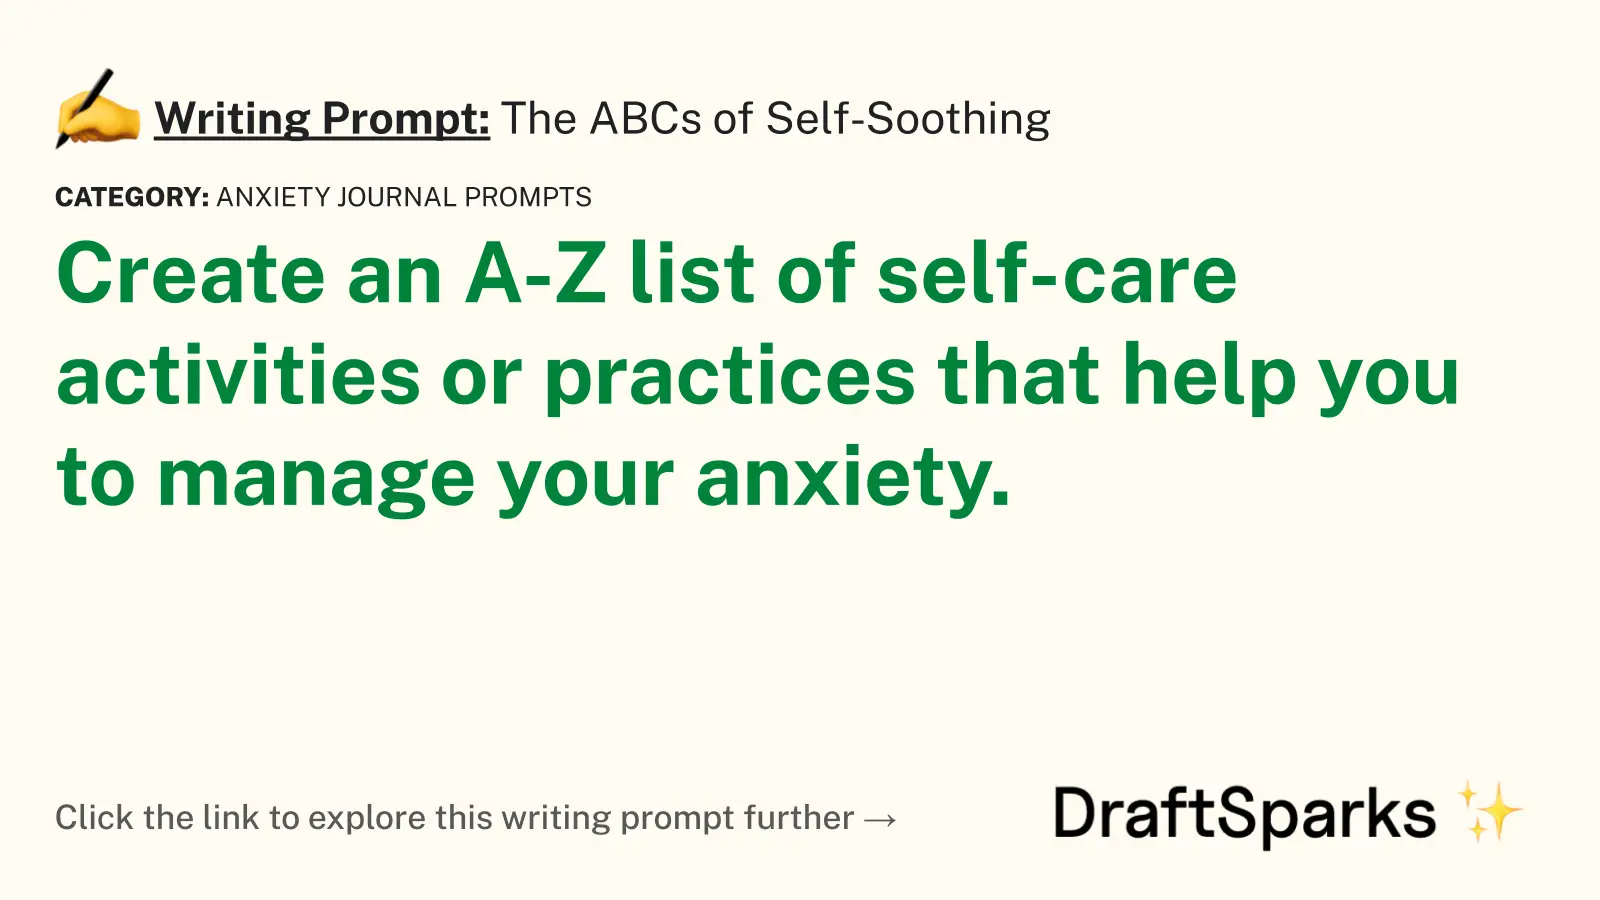 The ABCs of Self-Soothing